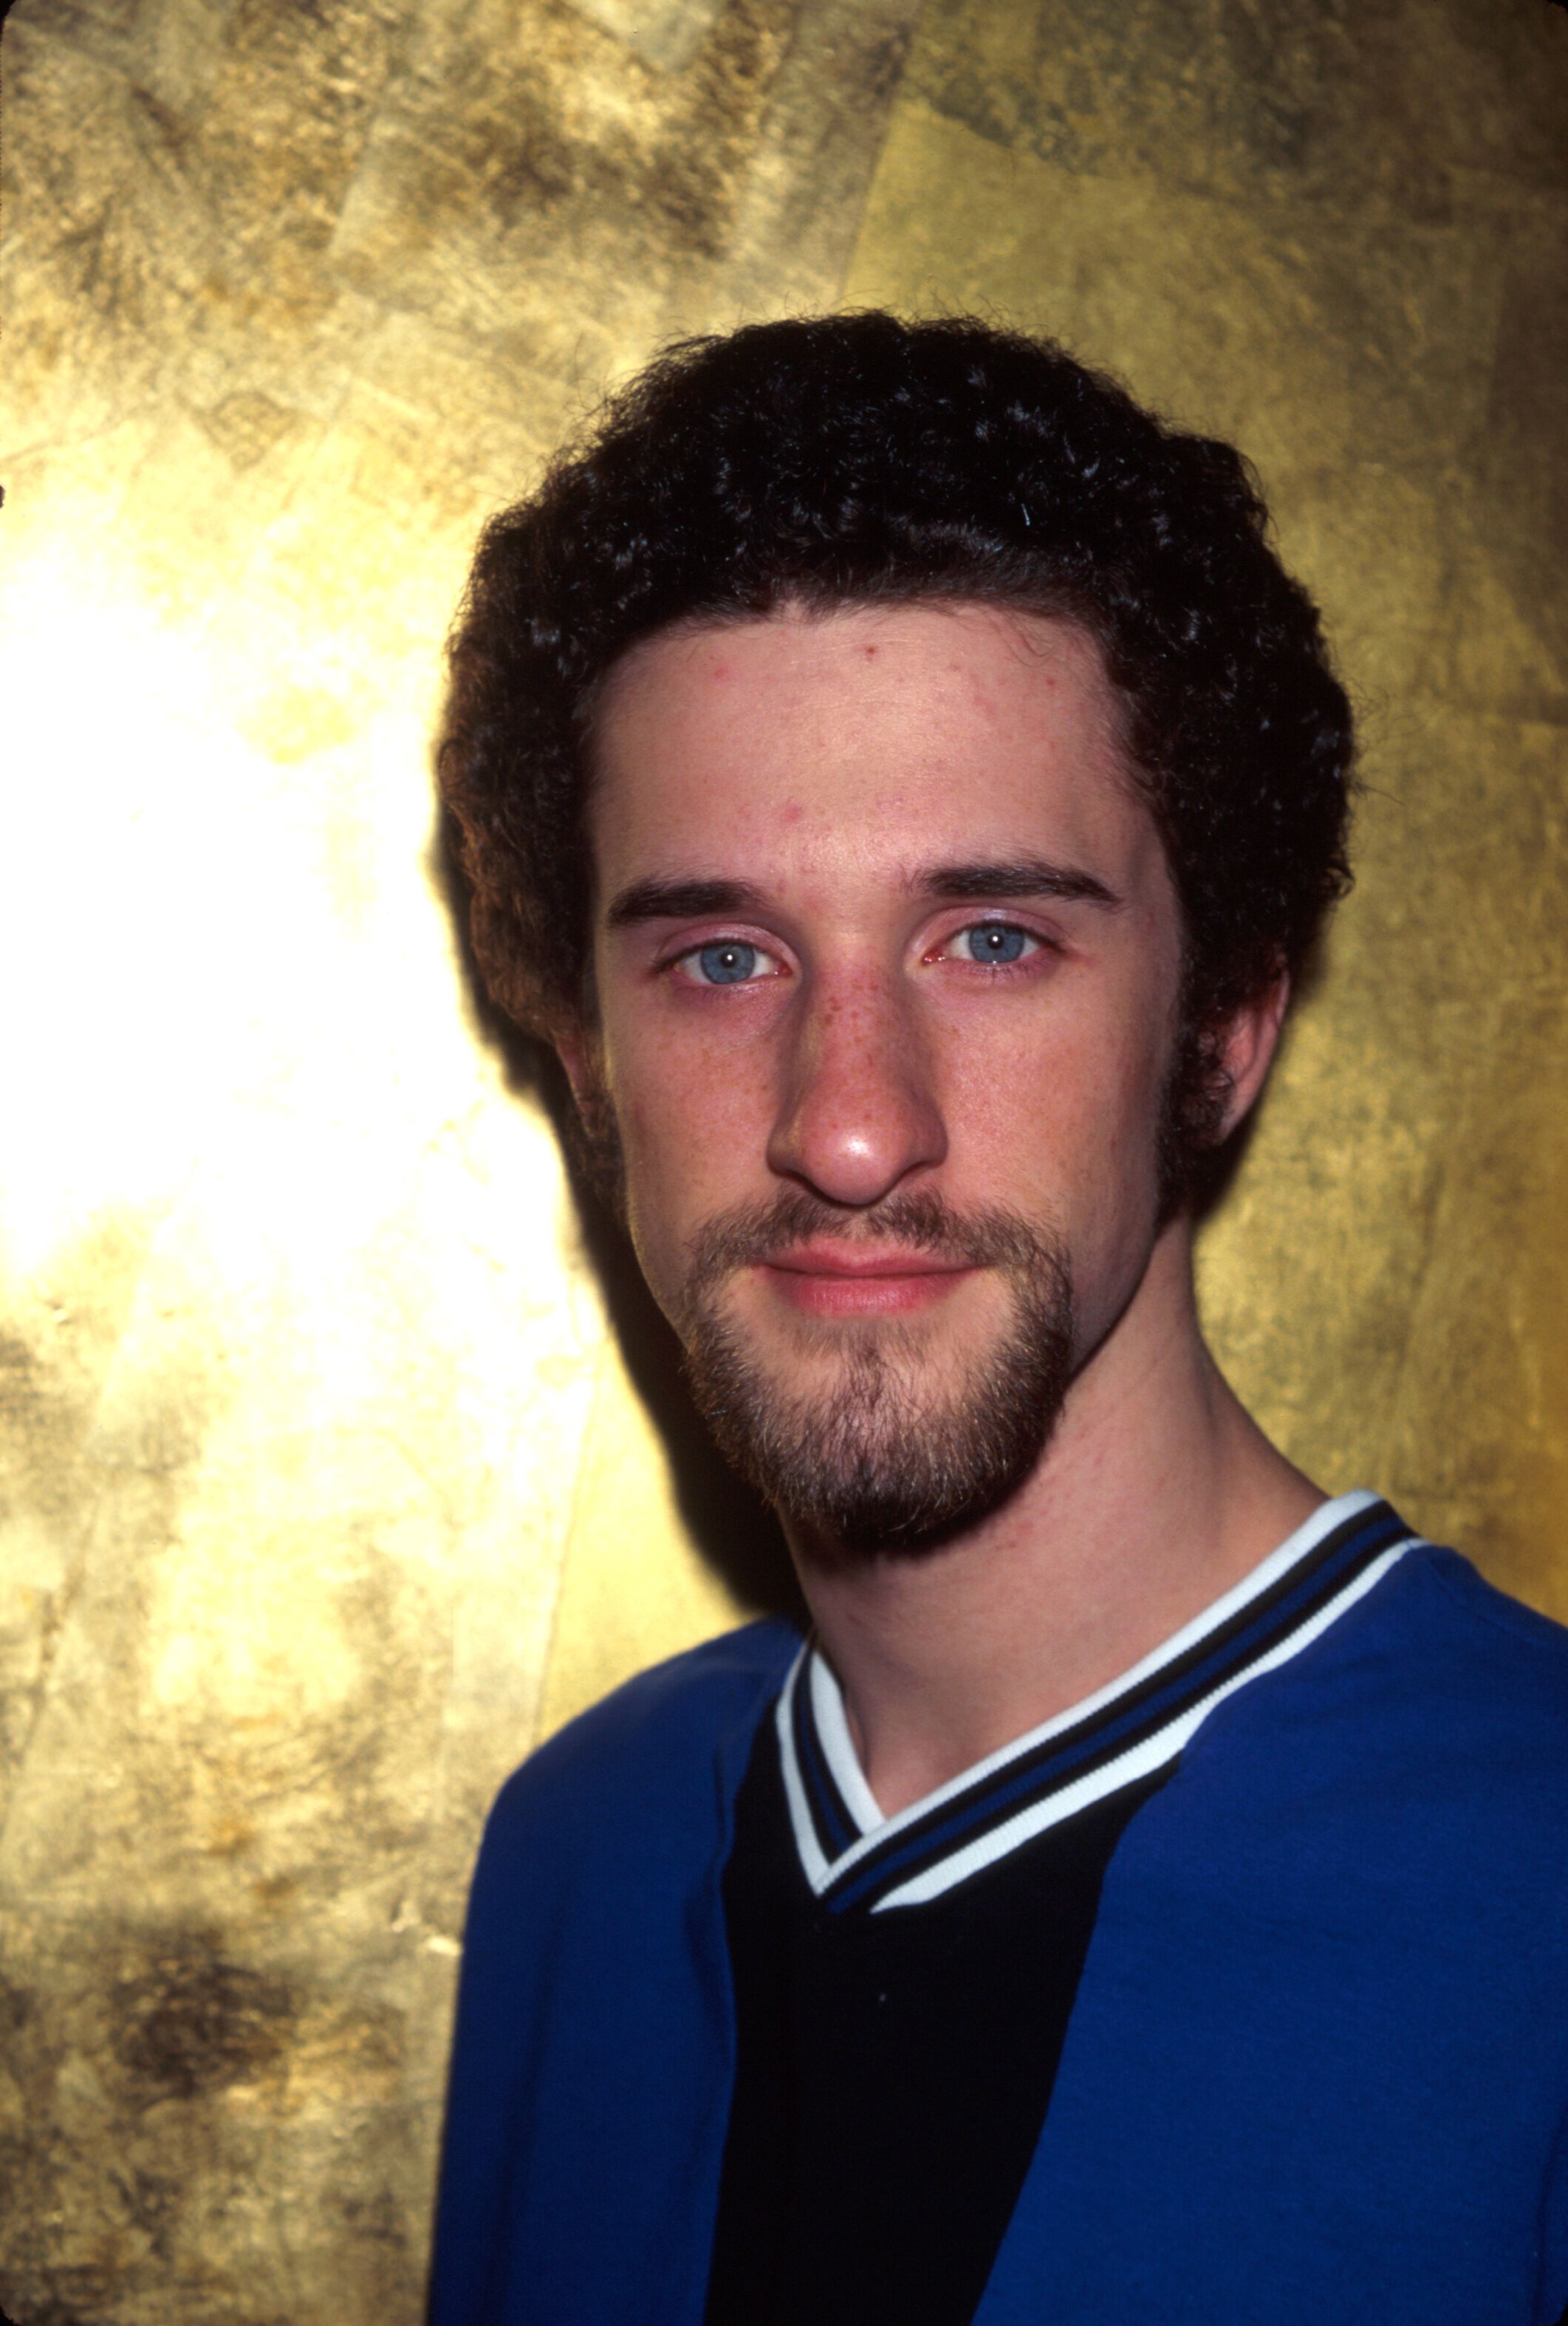 A portrait of Dustin Diamond uploaded on  March 09, 1996 | Photo: Dave Allocca/DMI/The LIFE Picture Collection/Getty Images